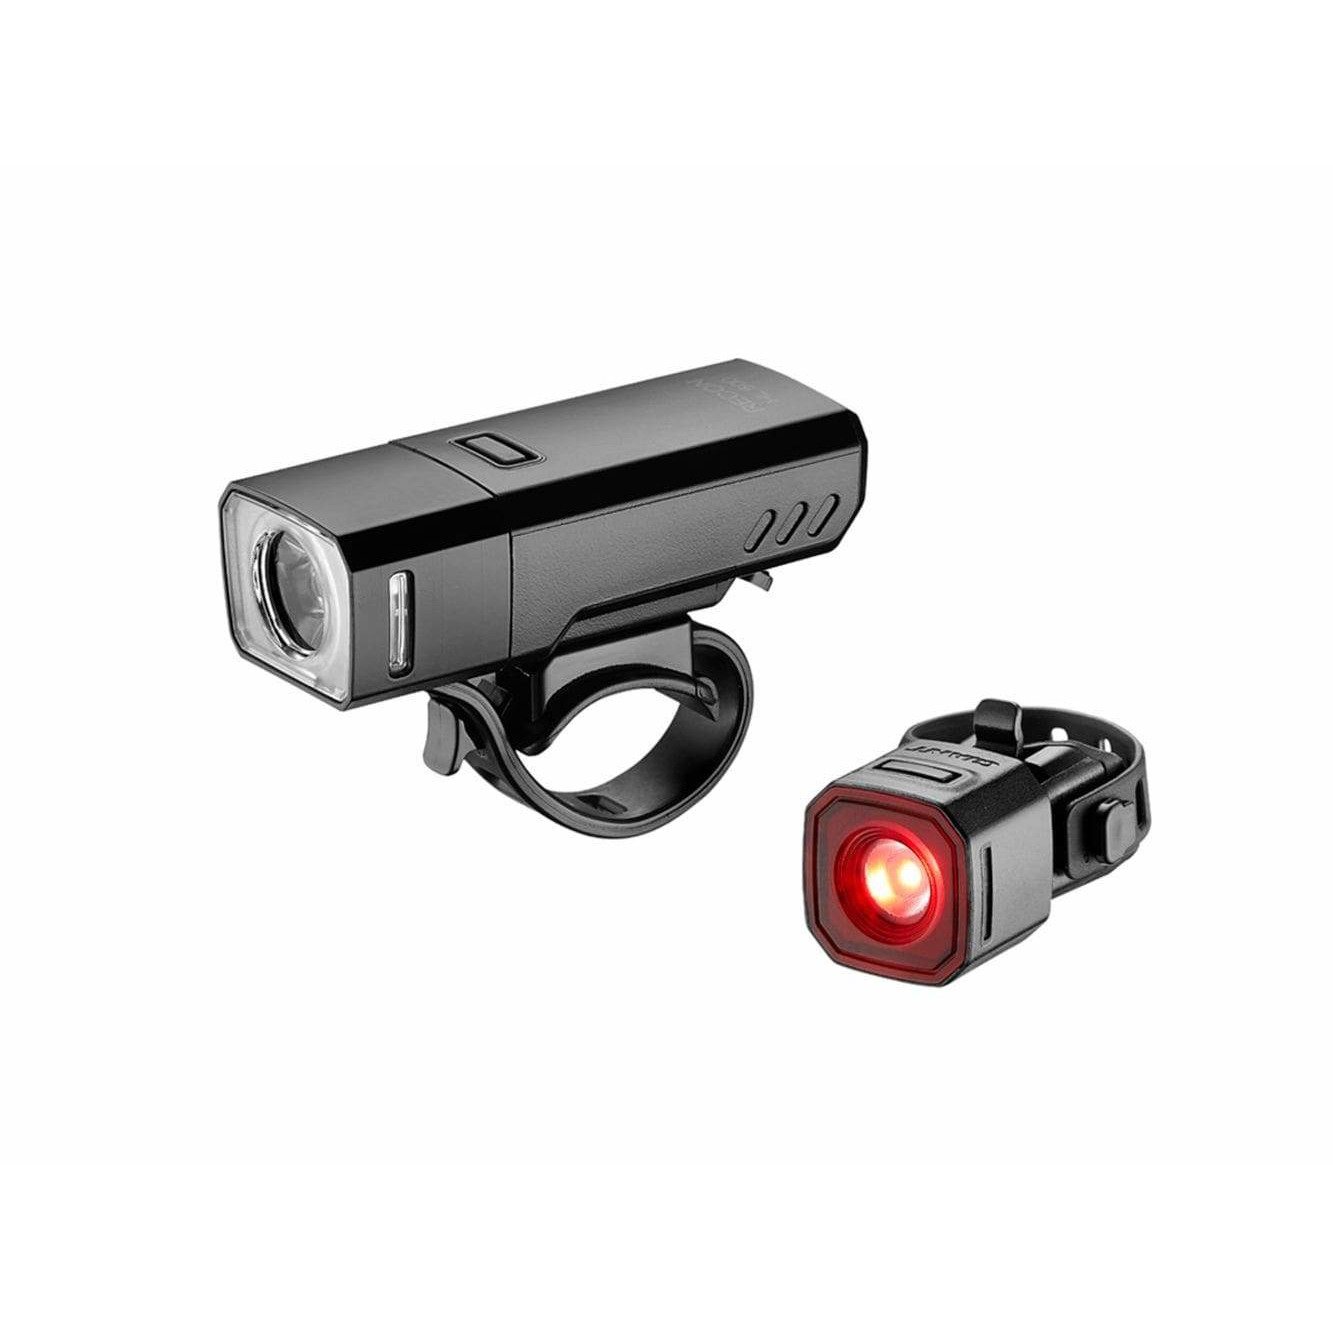 Giant Recon HL 500 and Recon TL 100 Bike Front and Rear Bike Light Set